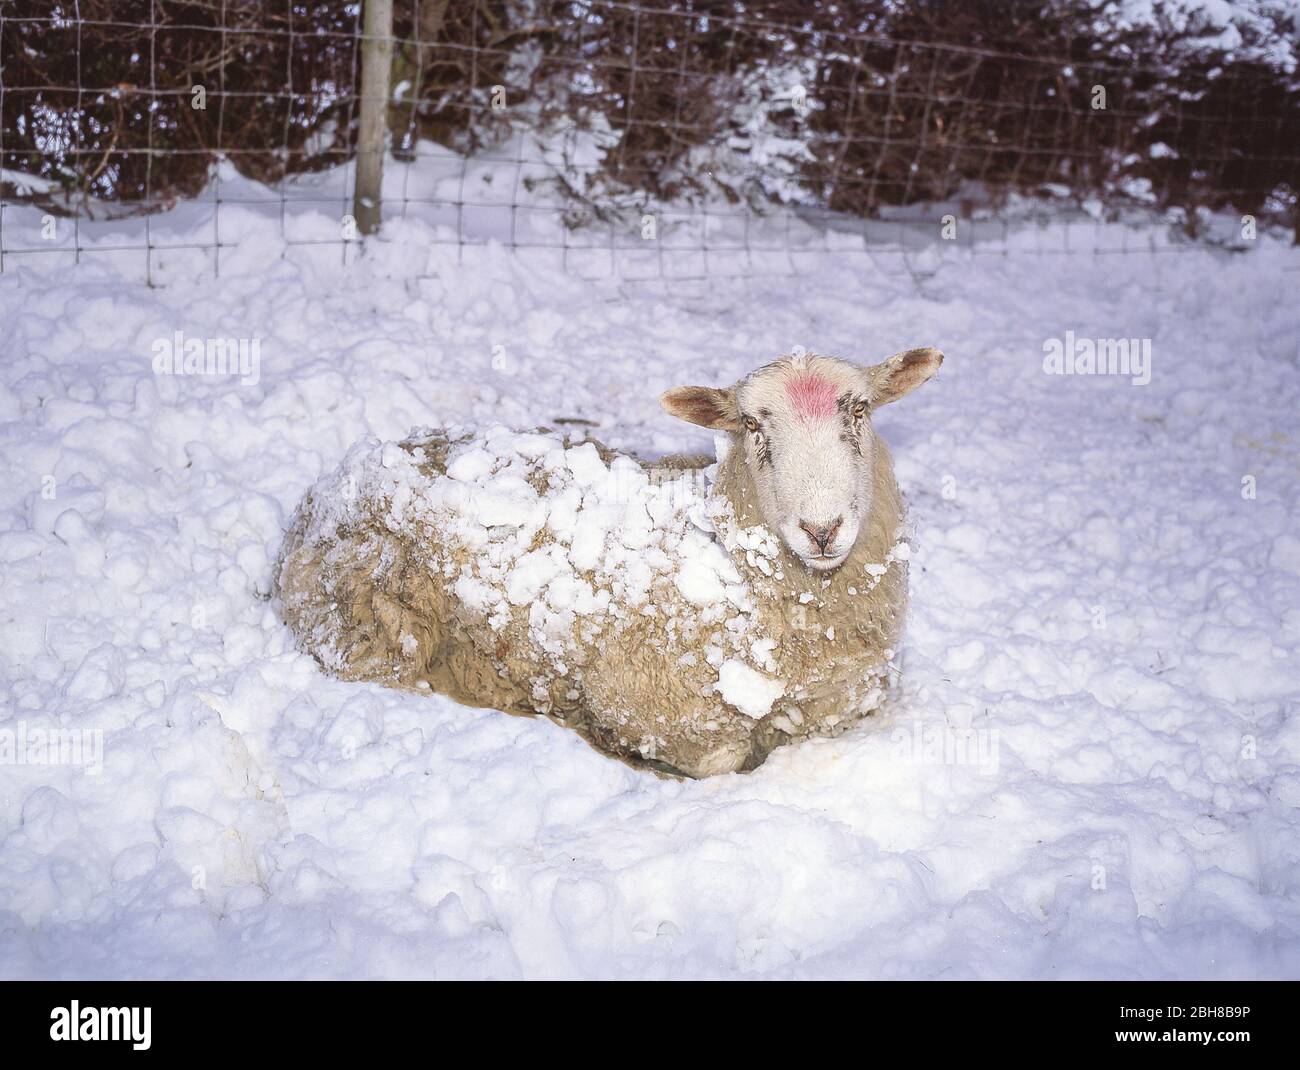 Sheep resting in winter snow, Gloucestershire, England, United Kingdom Stock Photo